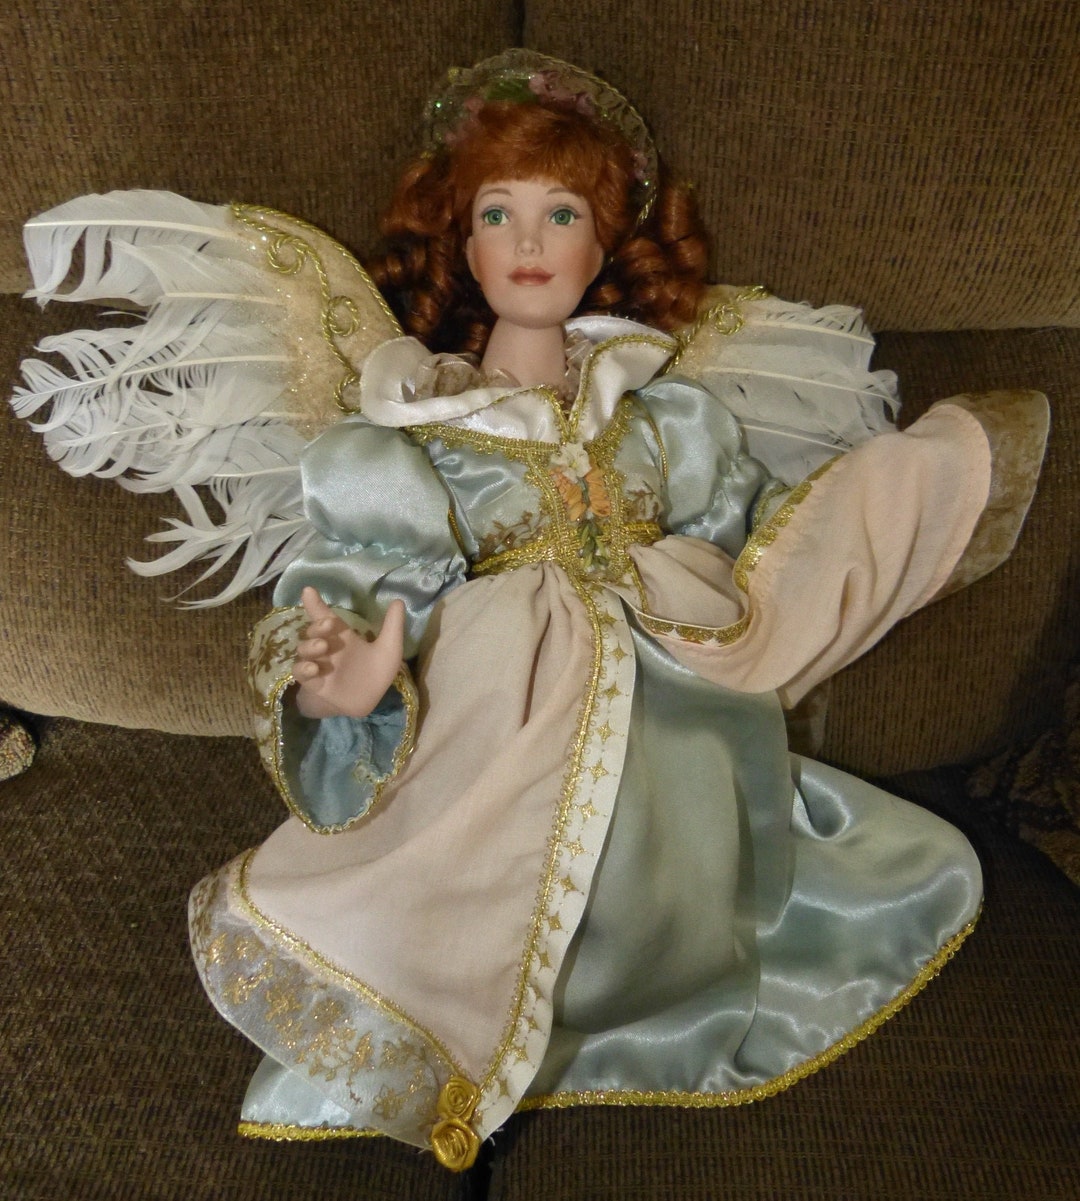 PARADISE GALLERIES Doll Patricia Rose K700 AEL 2000 Porcelain - Etsy